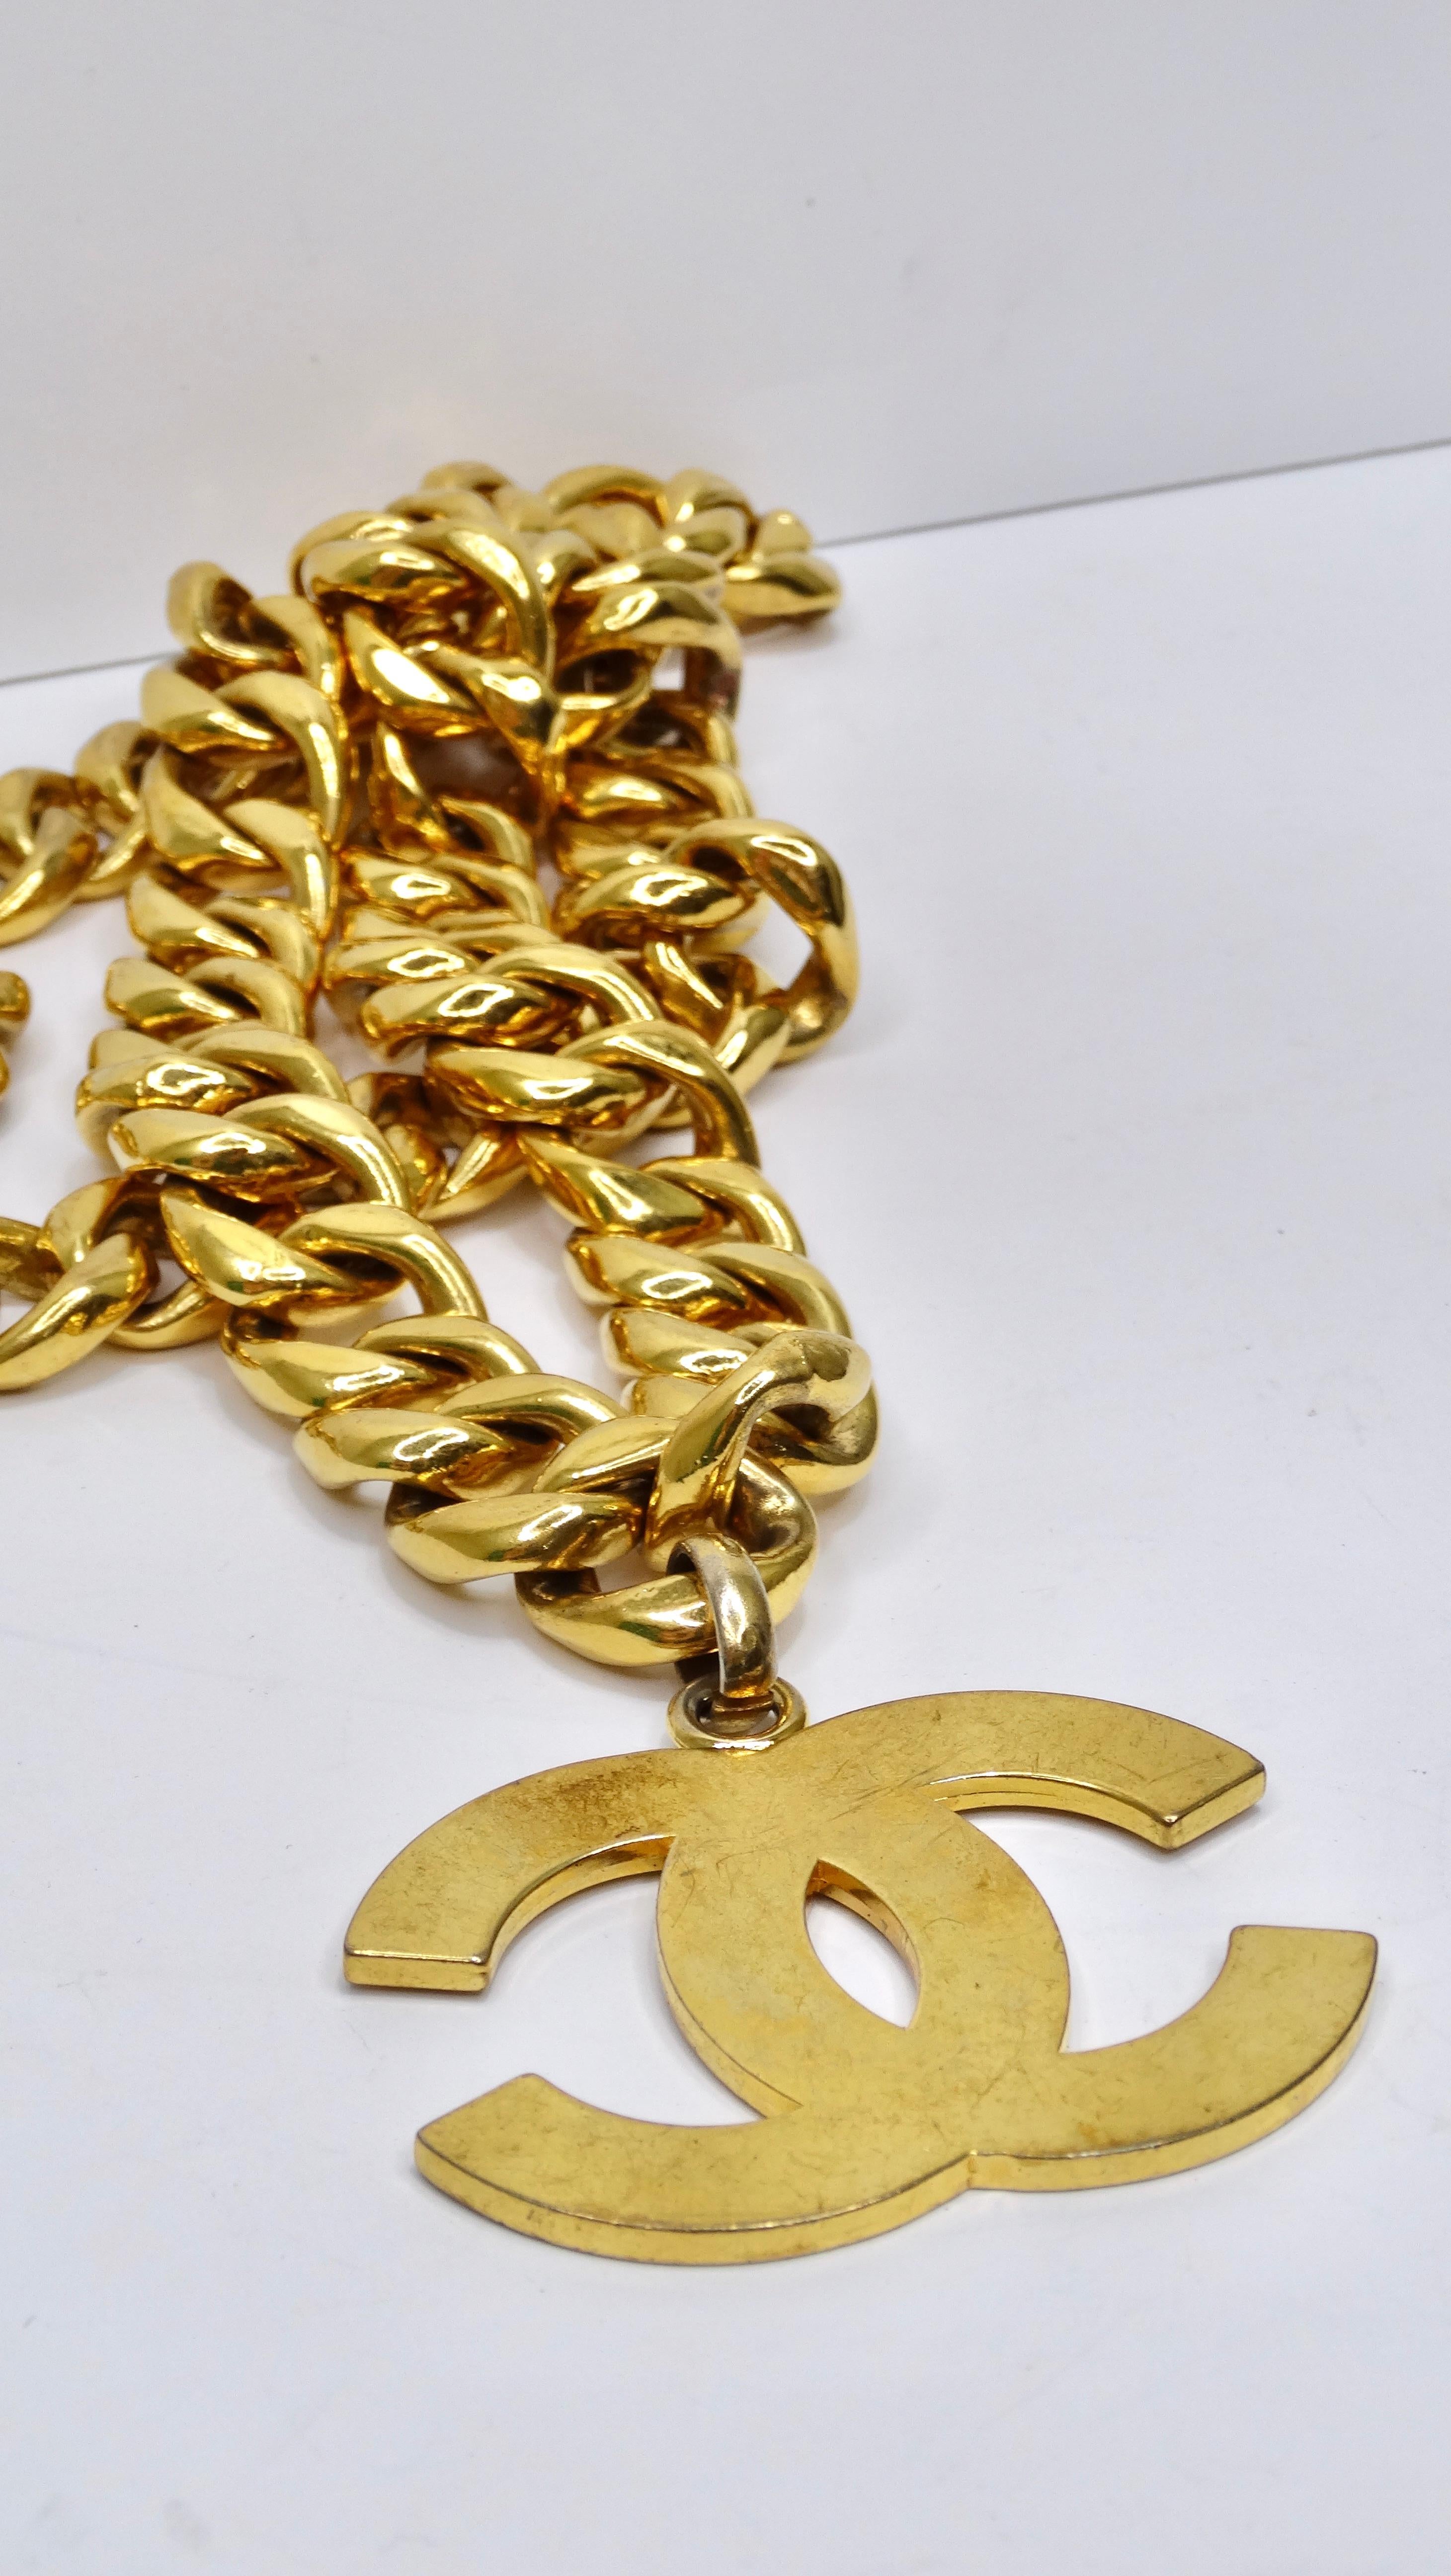 chanel logo necklace